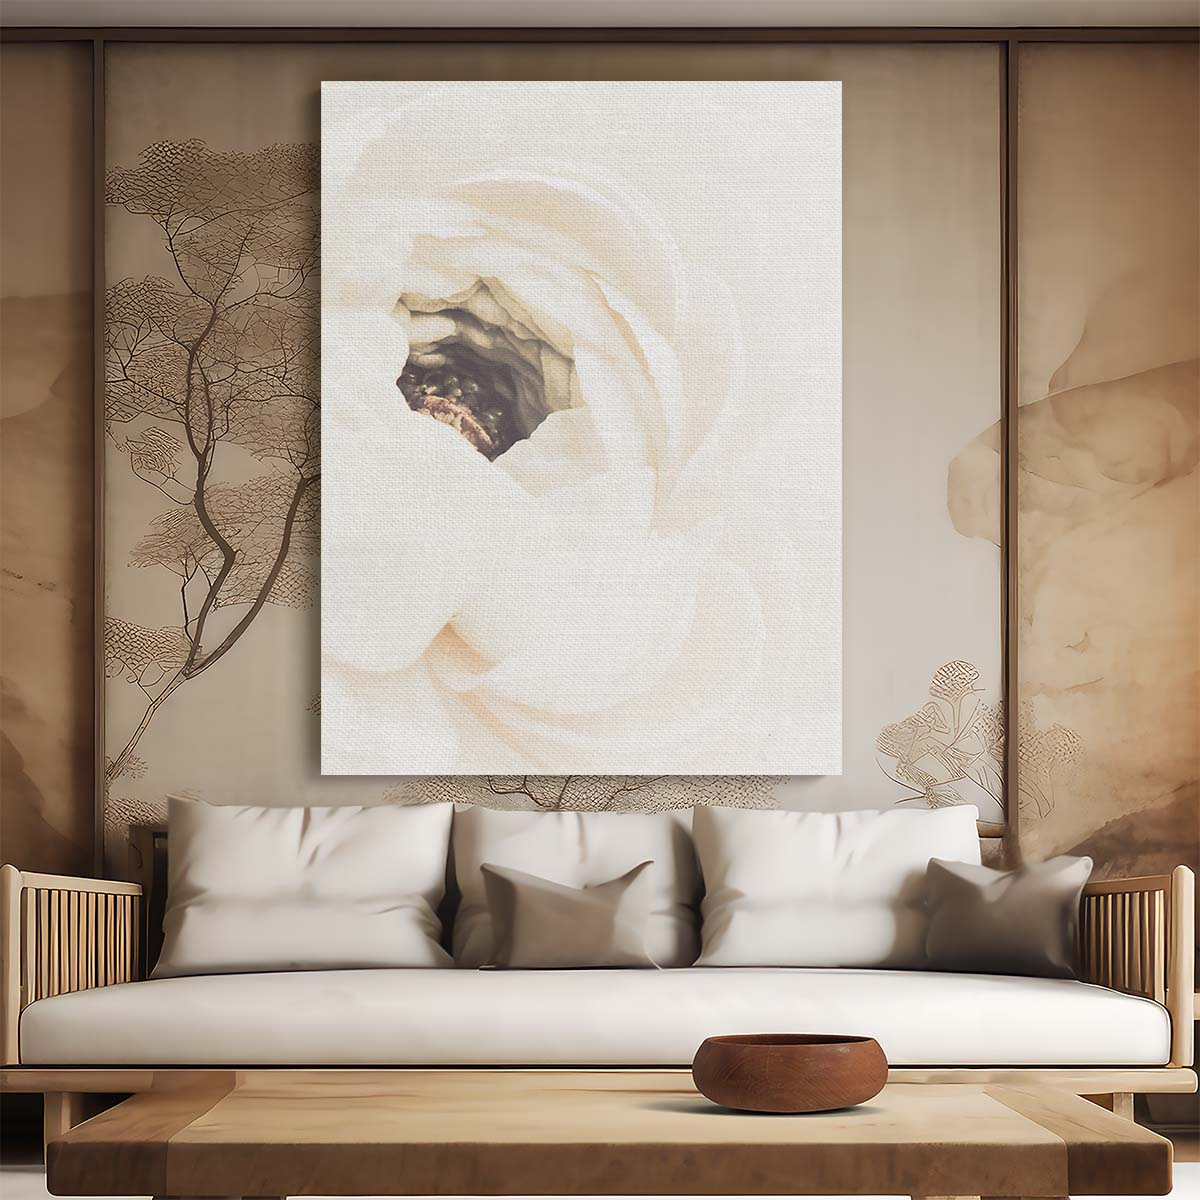 Vintage White Peony Blossom Floral Photography Art by Luxuriance Designs, made in USA